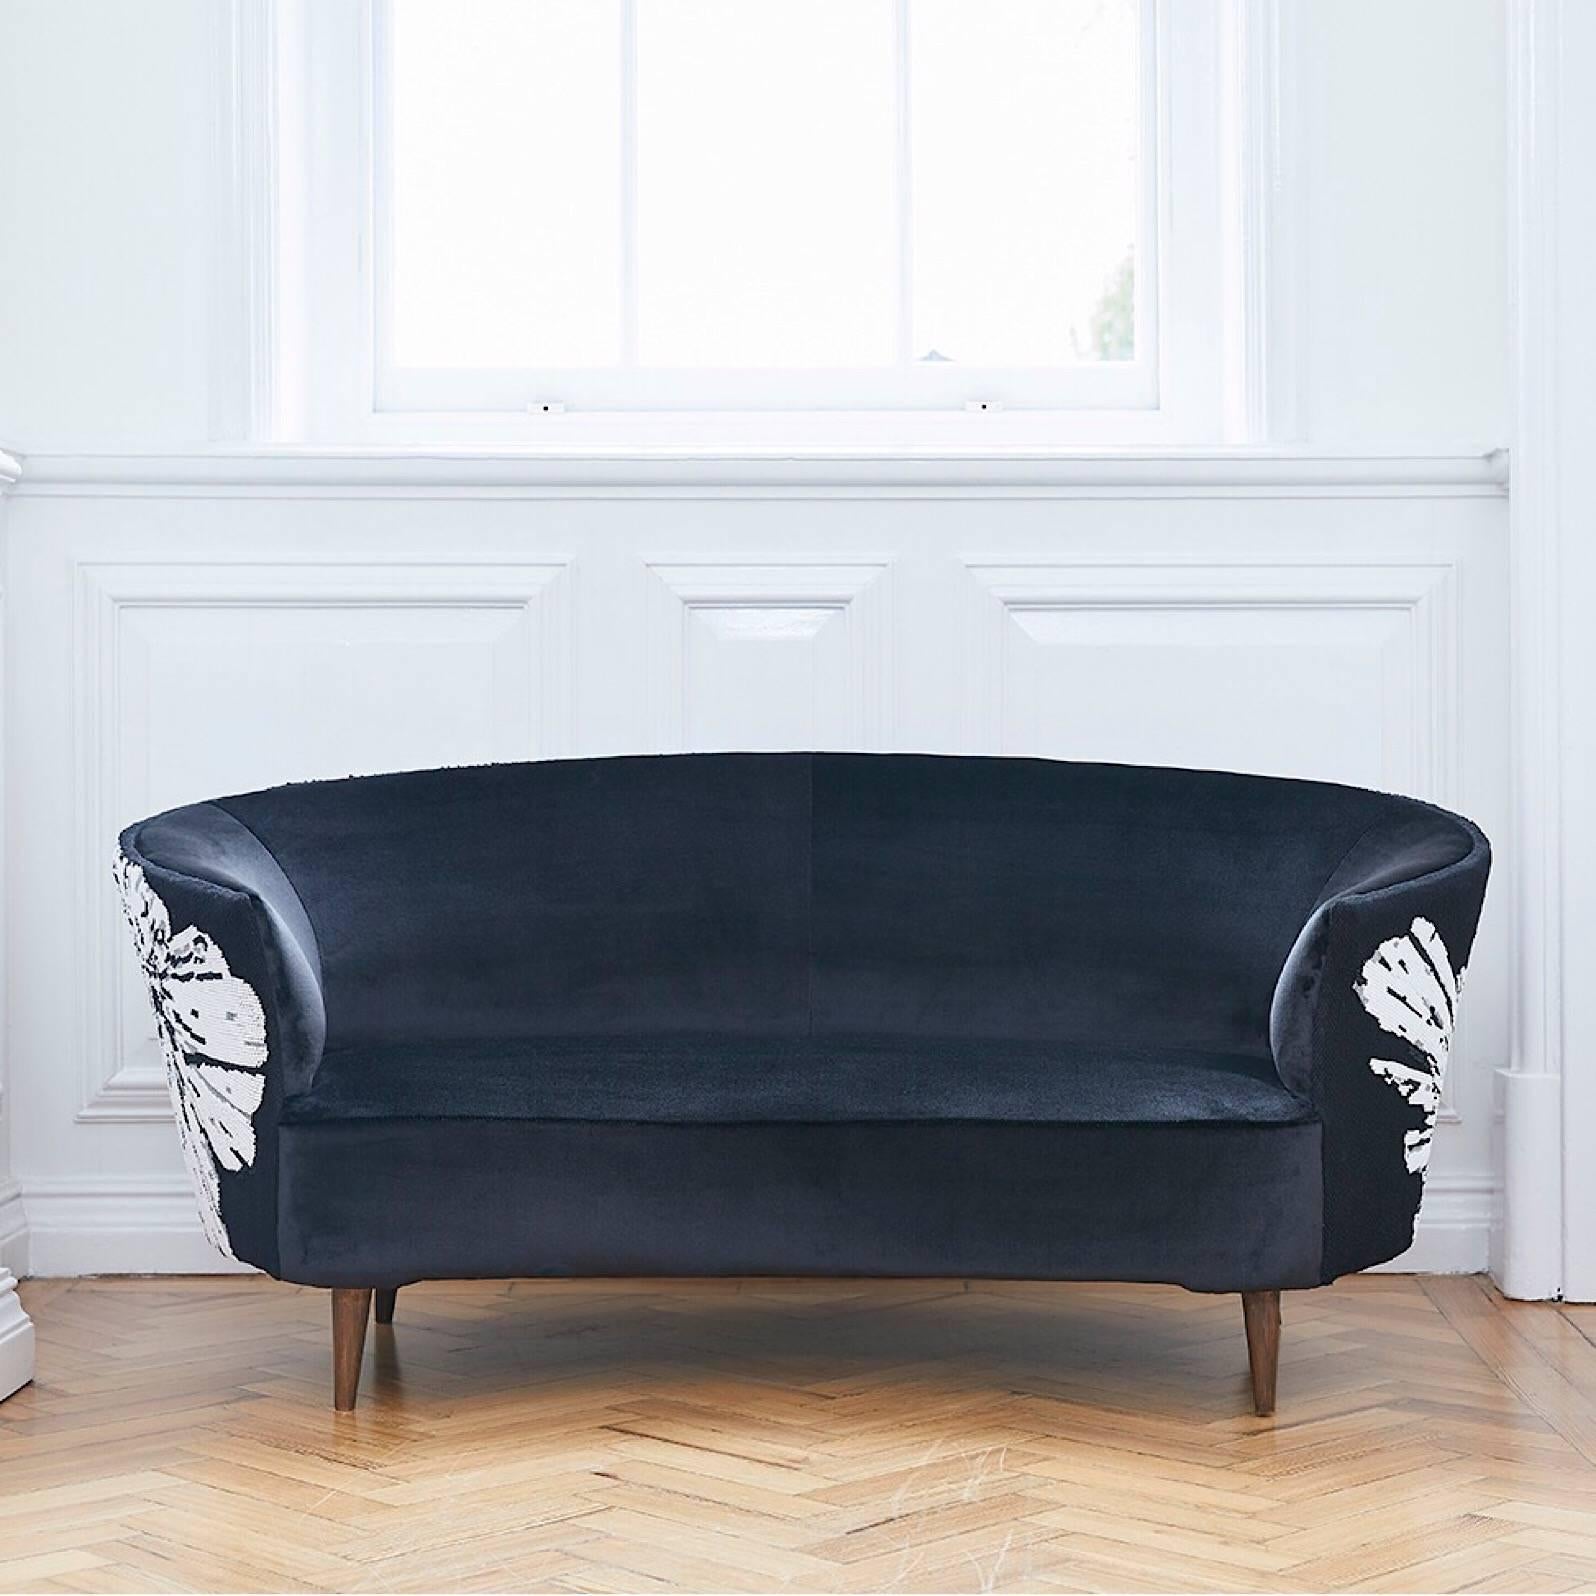 Mid-Century Modern Handcrafted Midcentury Curved Sofa with Hand Embroidered Back Black and White For Sale